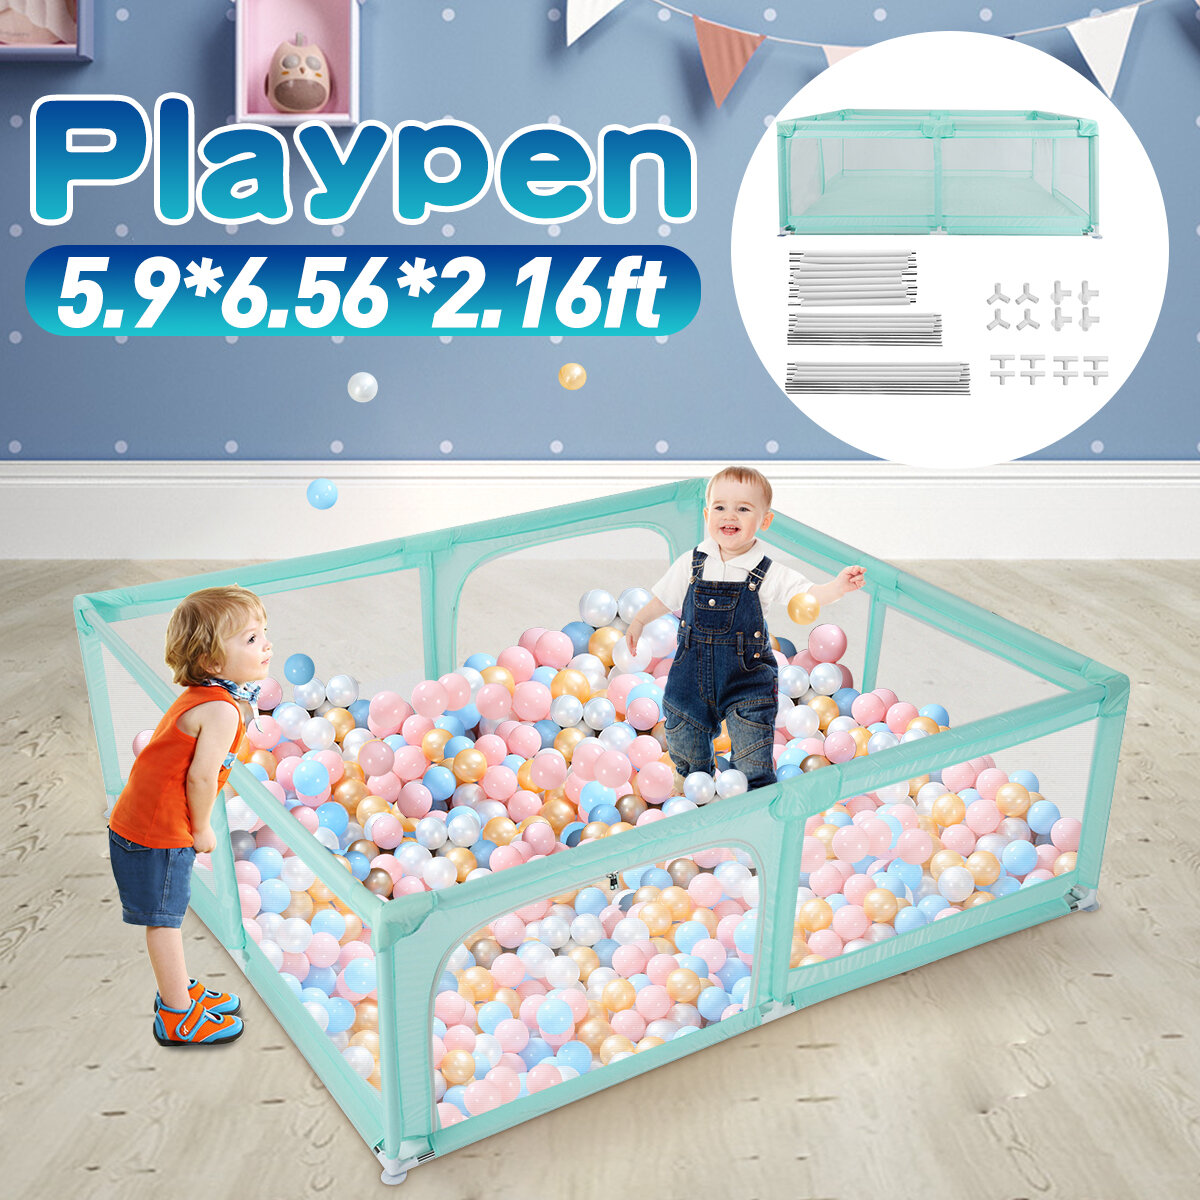 2.0X2.0M Baby Playpen Extra Large Play Yard Indoor Outdoor Kids Activity Center &Gate